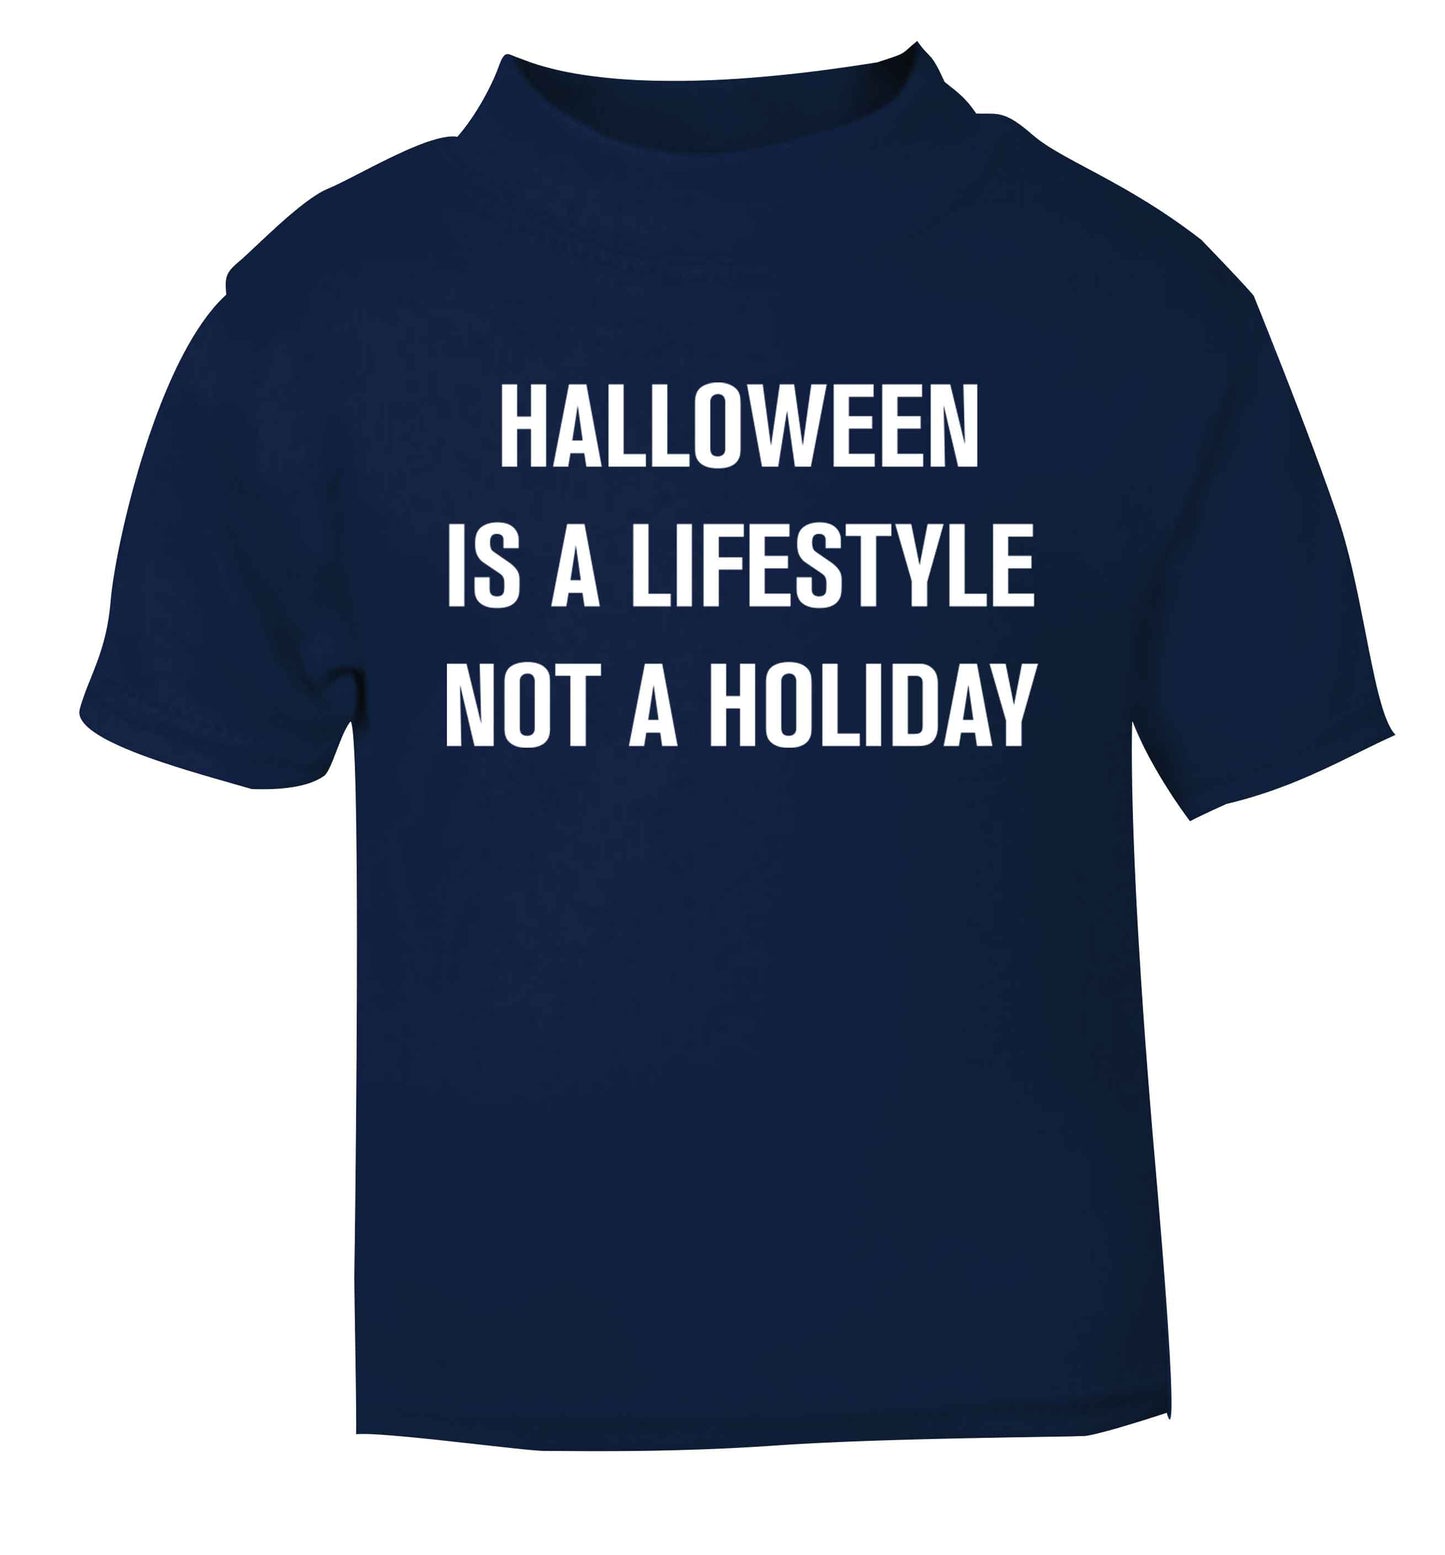 Halloween is a lifestyle not a holiday navy baby toddler Tshirt 2 Years